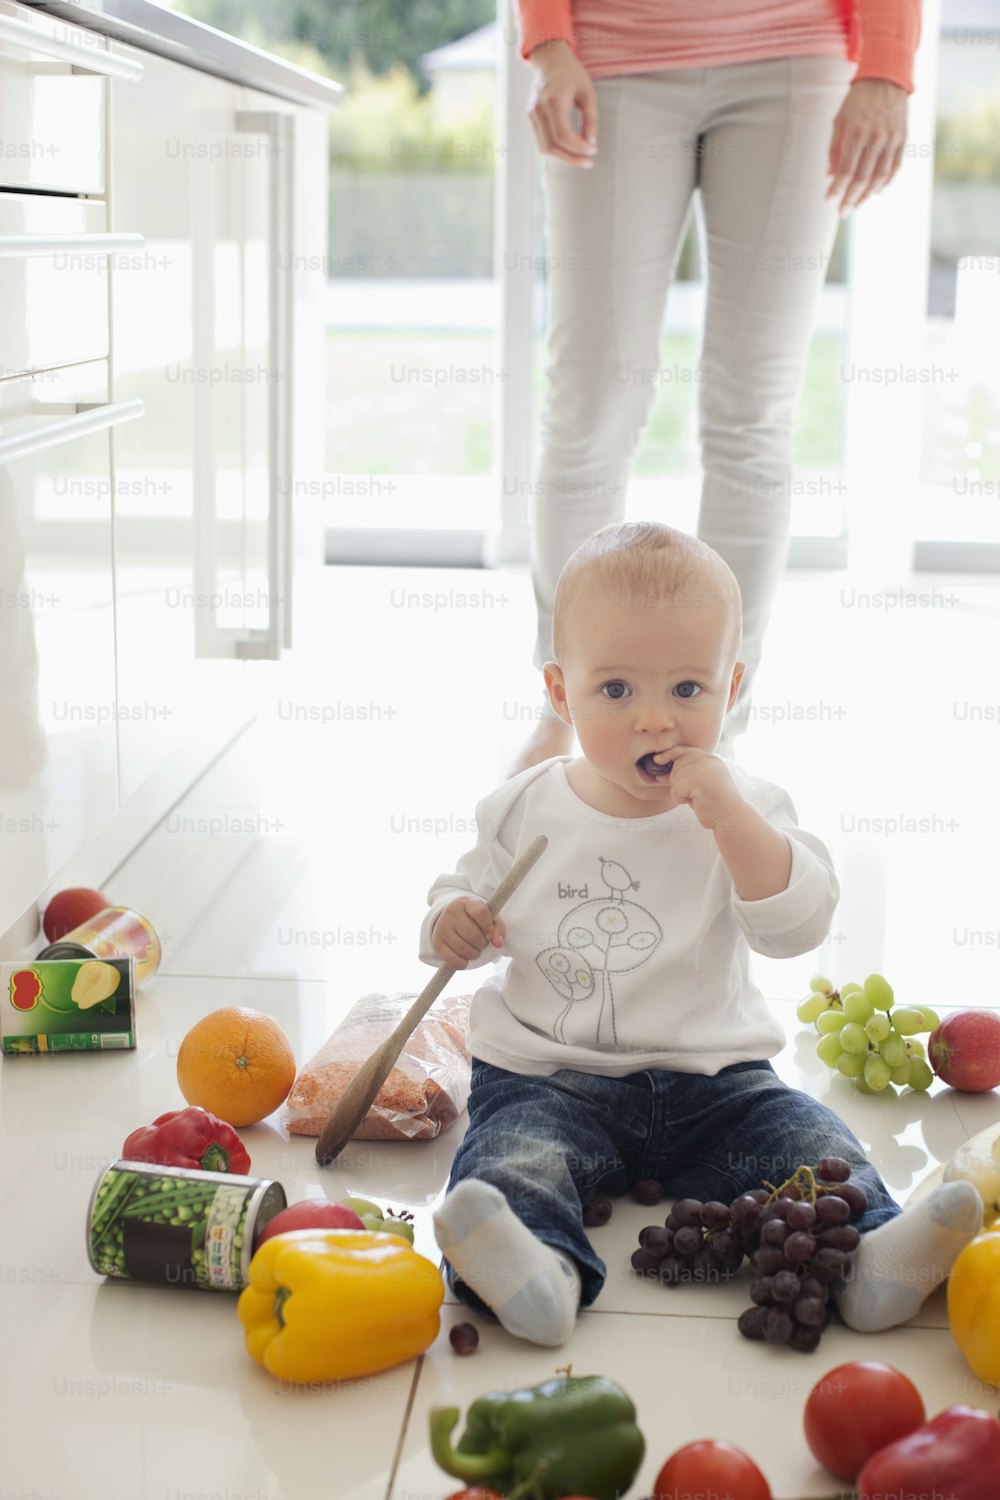 a baby sitting on the floor surrounded by fruits and vegetables